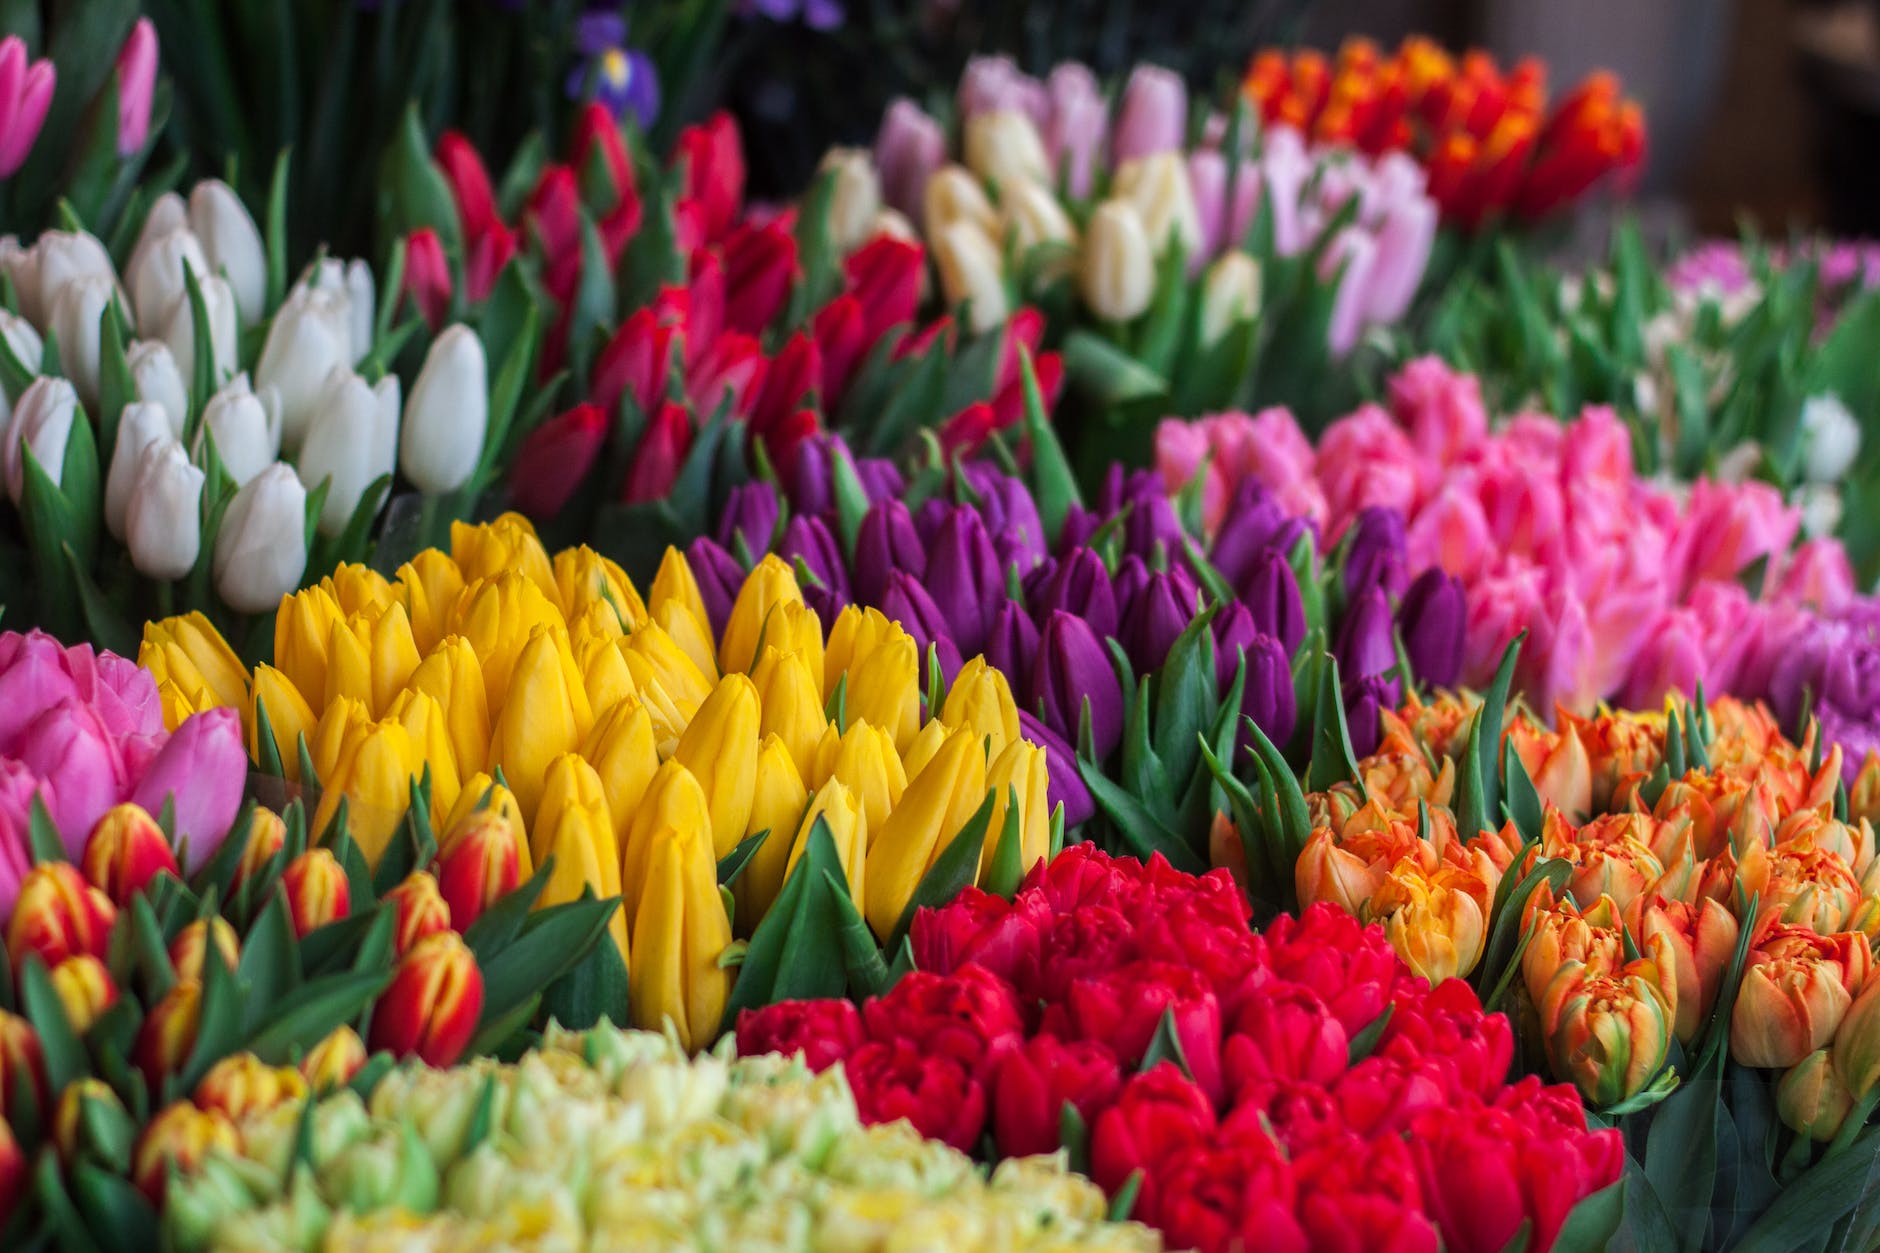 Where to stay for Holland Tulip festival